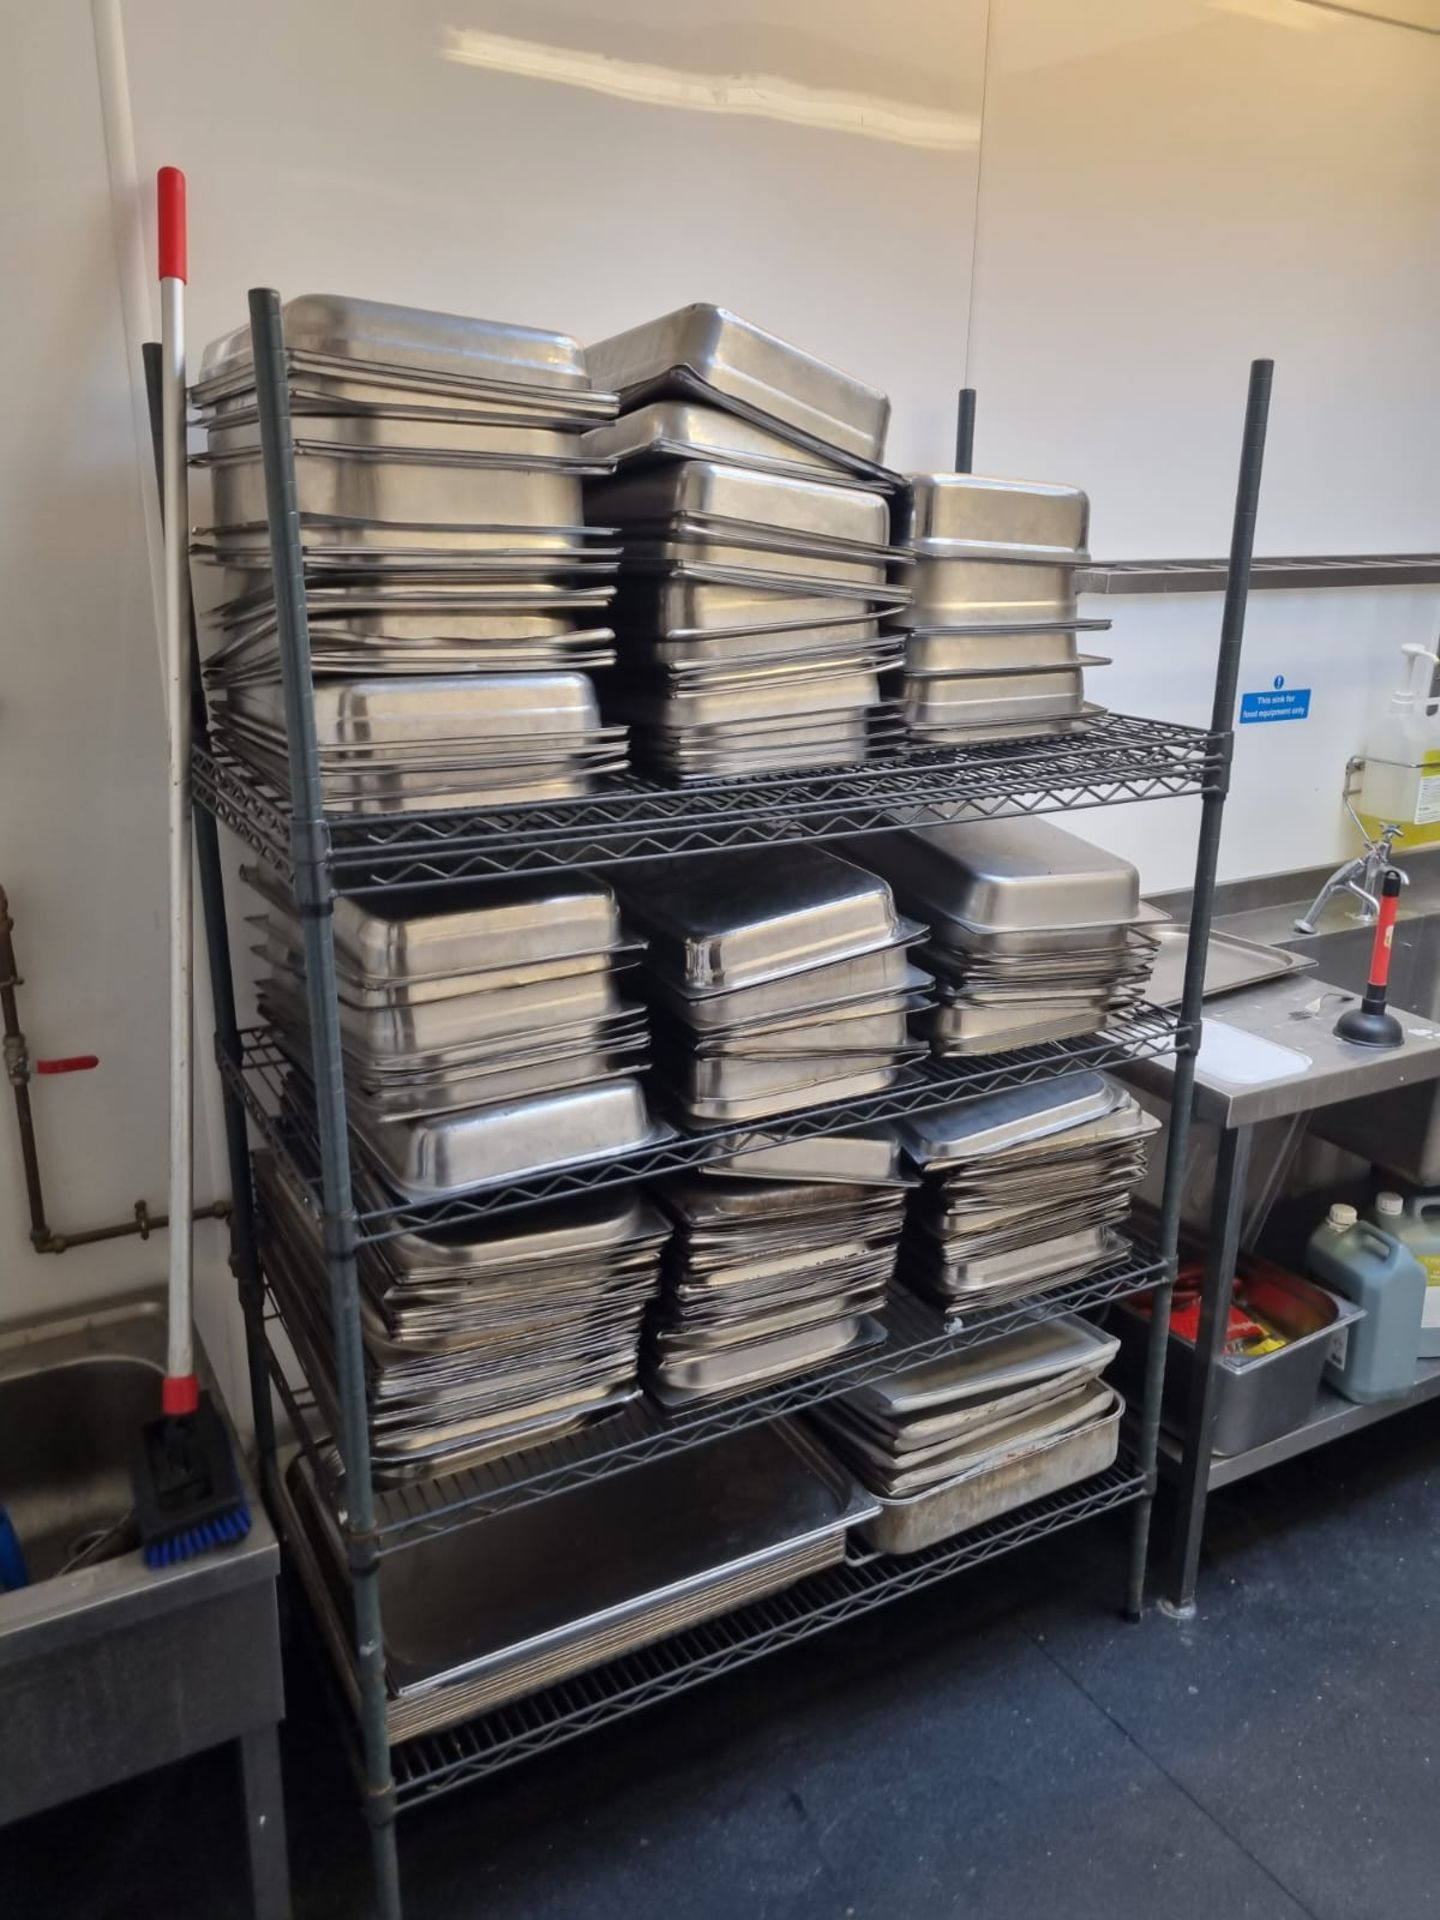 OEM- Large quantity of stainless GN Baine Marie pans, lids and chef kitchen utensils ( Main - Image 3 of 3